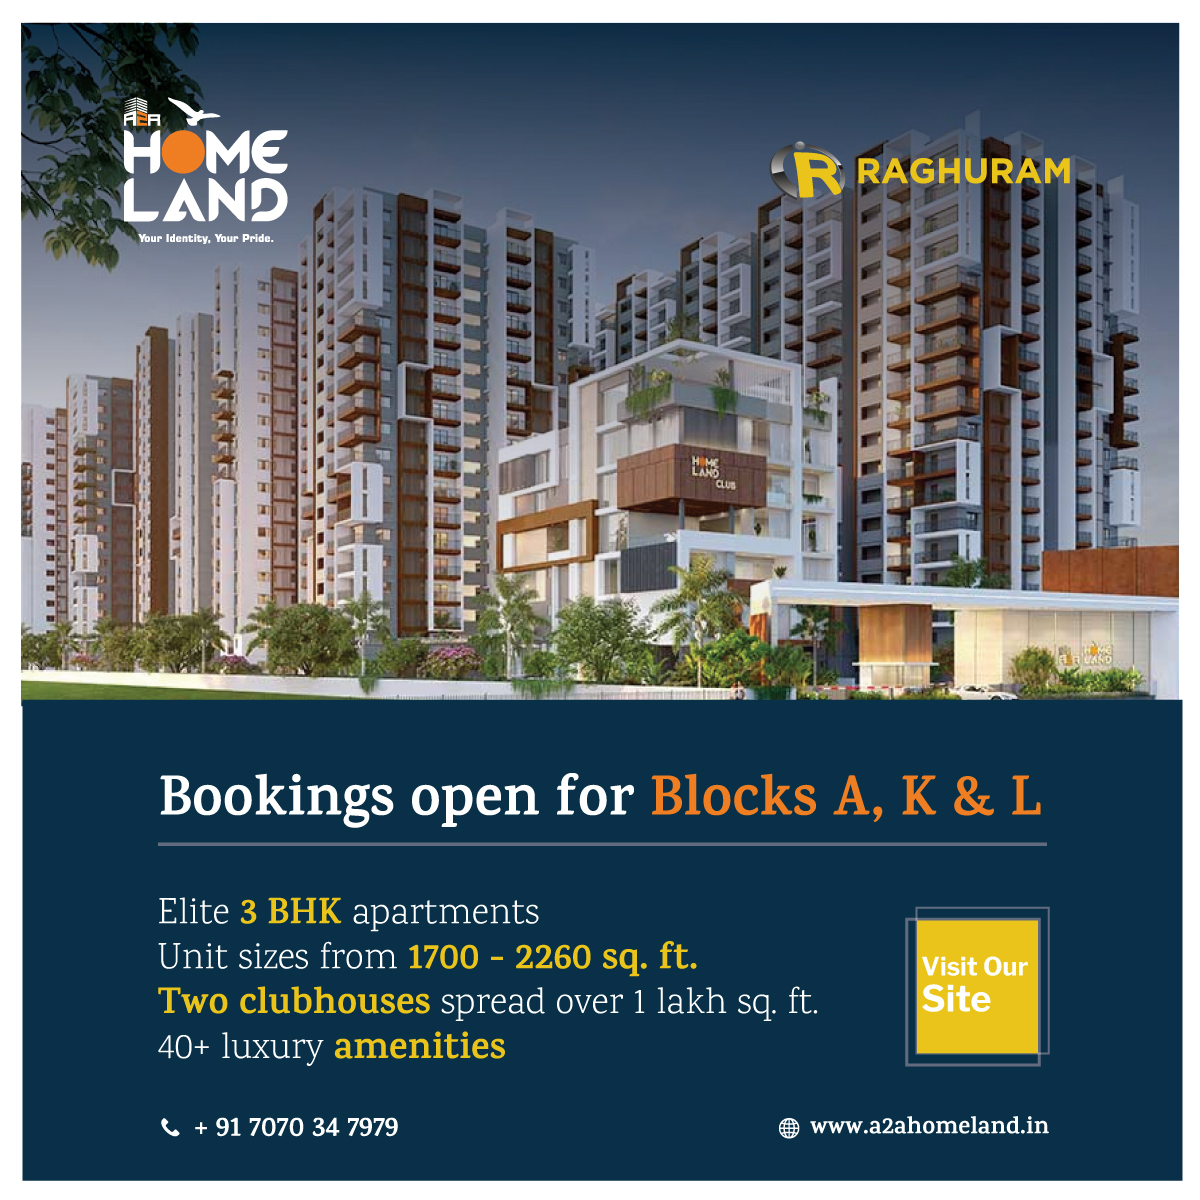 Experience luxury living  @A2aHomeland #Elite3BHKFlats. Our spacious units range from 1700 - 2260 sq. ft. We offer two clubhouses and over 40 luxury amenities. #Bookingsopen for Blocks A, K, and L. Schedule your visit today!
#Visitnow @RaghuramGroup #Balanagar #Kukataplly